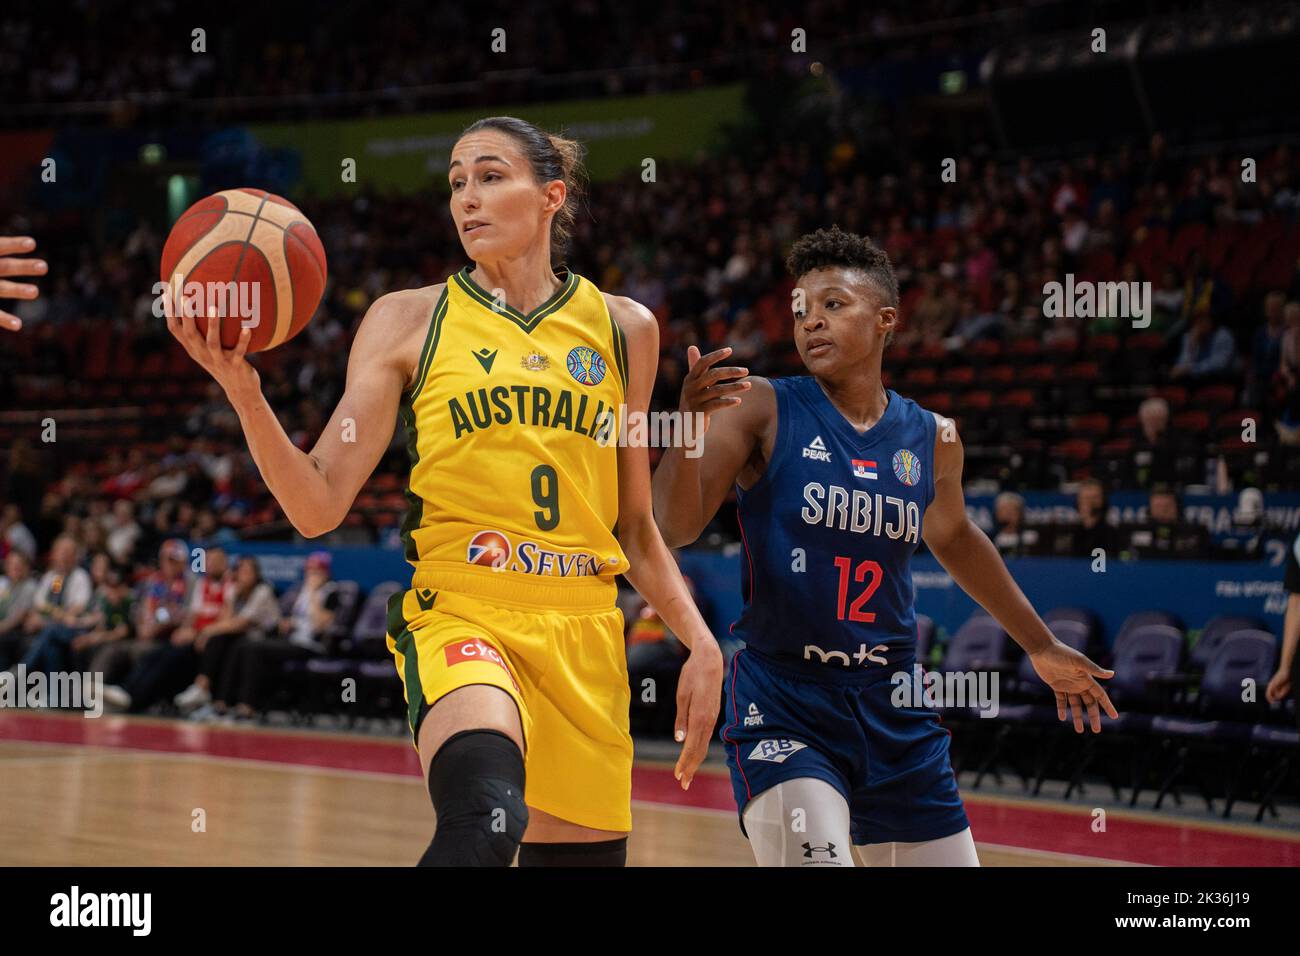 Sydney, Australia. 25th Sep, 2022. Bec Allen (9 Australia) passes the ball whilst defended by Yvonne Anderson (12 Serbia) during the FIBA Womens World Cup 2022 game between Australia and Serbia at the Sydney Superdome in Sydney, Australia. (Foto: Noe Llamas/Sports Press Photo/C - ONE HOUR DEADLINE - ONLY ACTIVATE FTP IF IMAGES LESS THAN ONE HOUR OLD - Alamy) Credit: SPP Sport Press Photo. /Alamy Live News Stock Photo